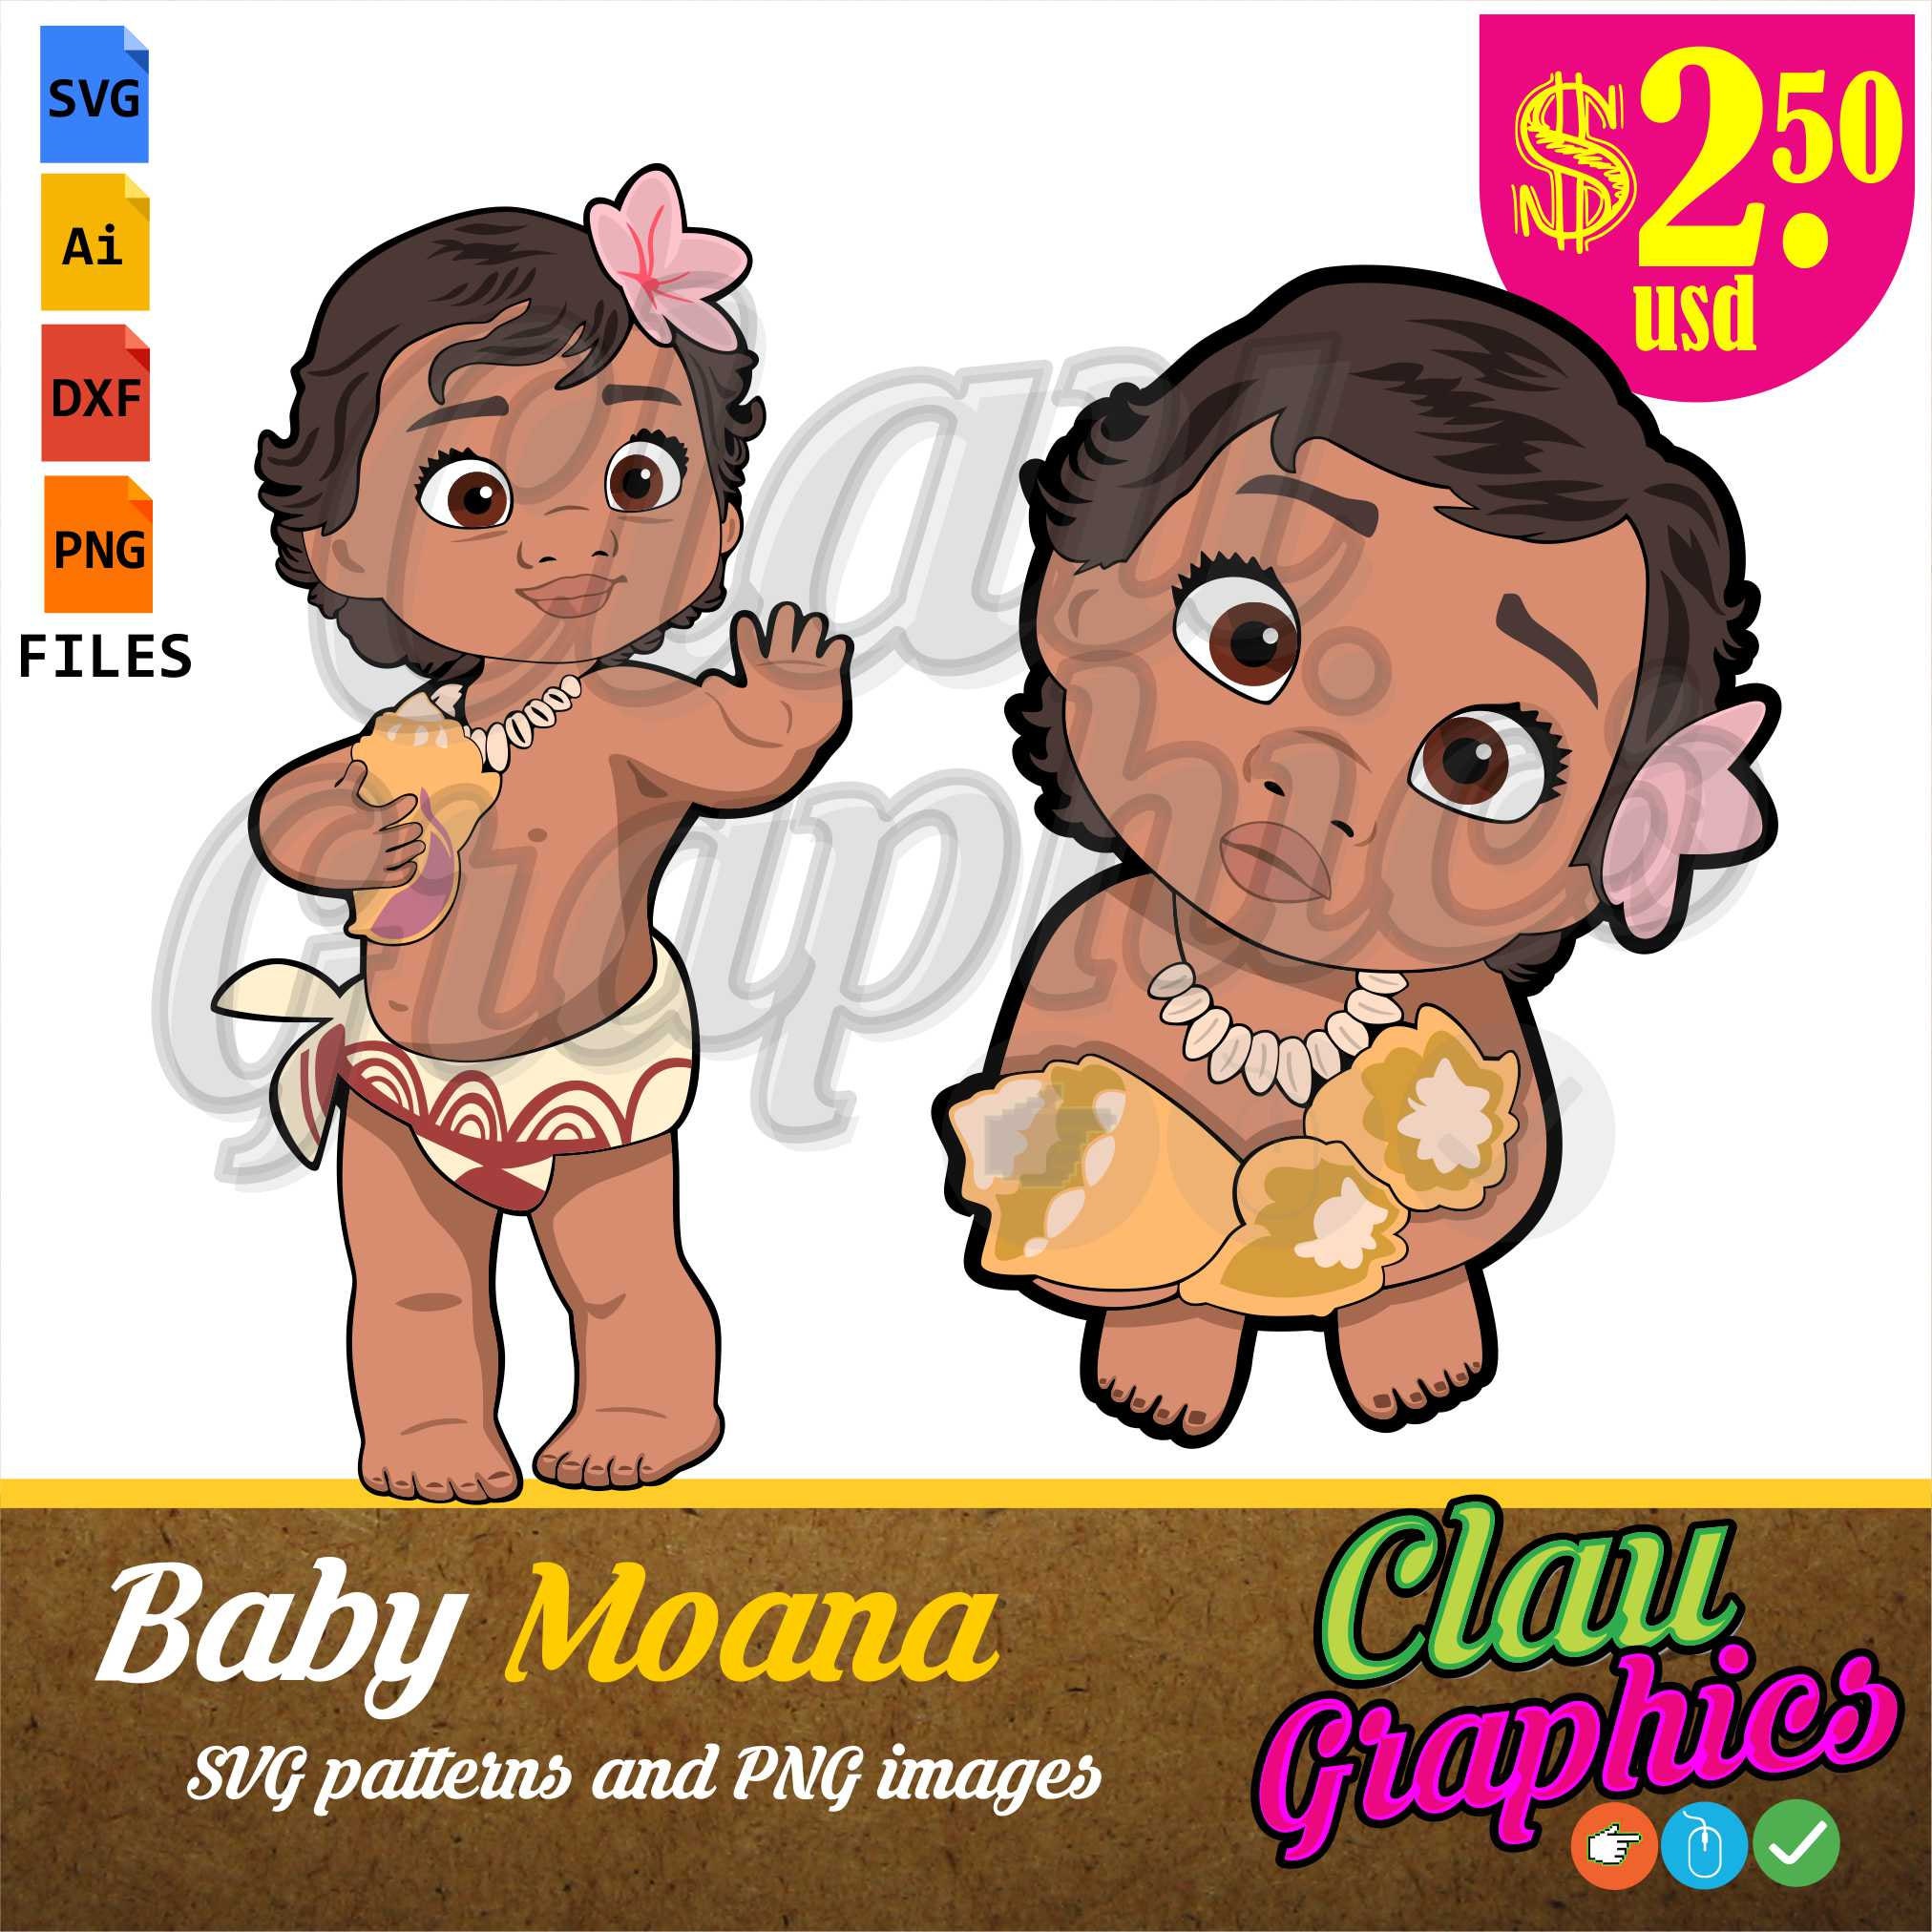 Download Baby MOANA movie digital collection SVG patterns and editable